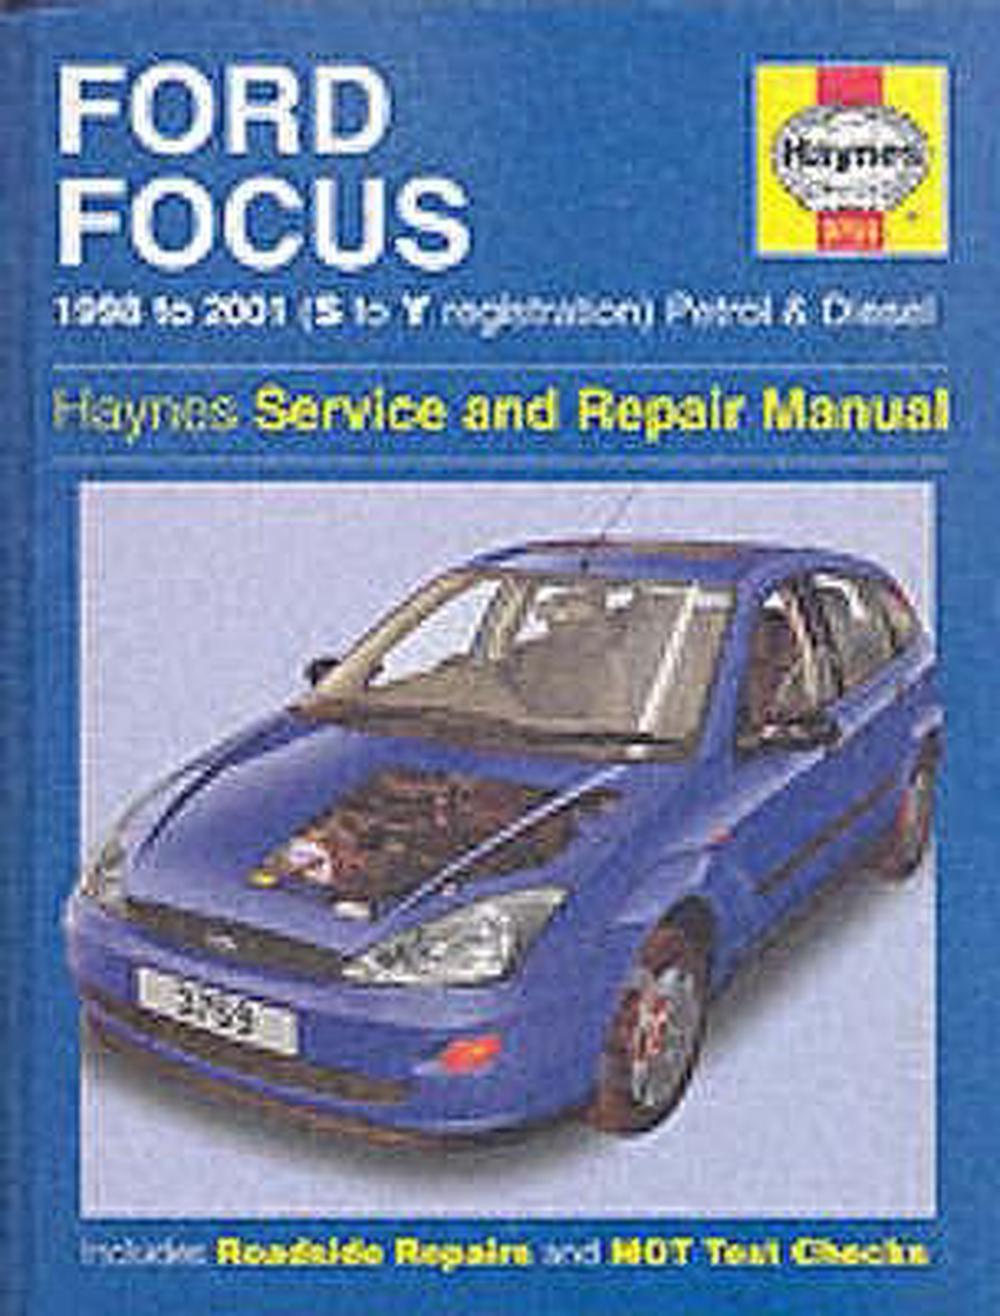 Ford Focus Service and Repair Manual by Peter Gill, Hardcover